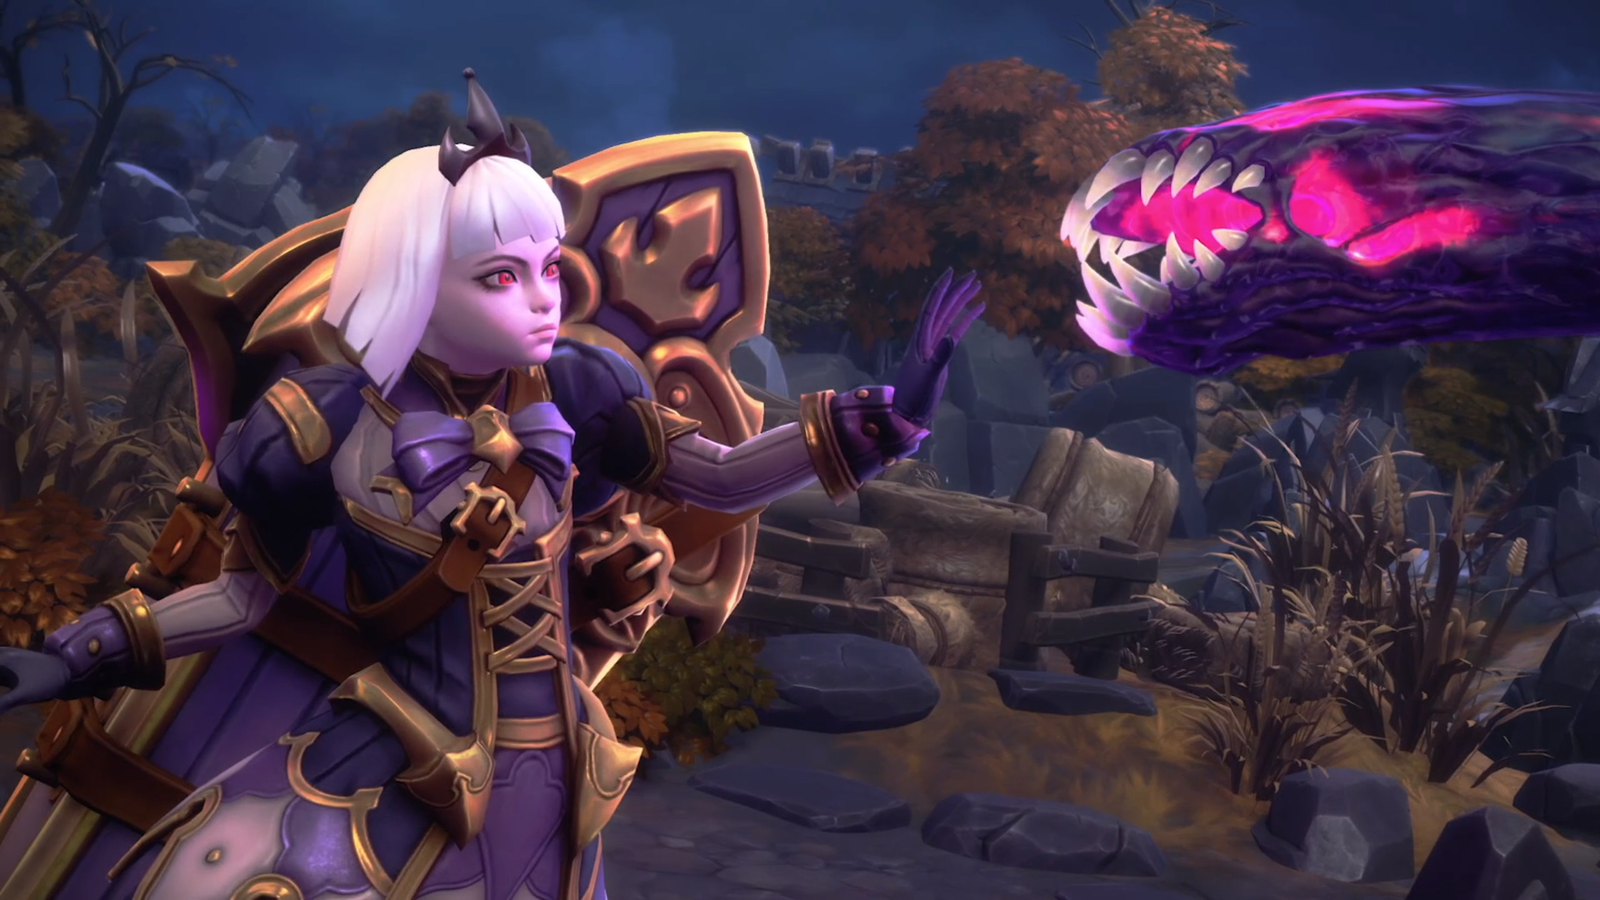 Heroes of the Storm' Introduces a New Hero, Orphea